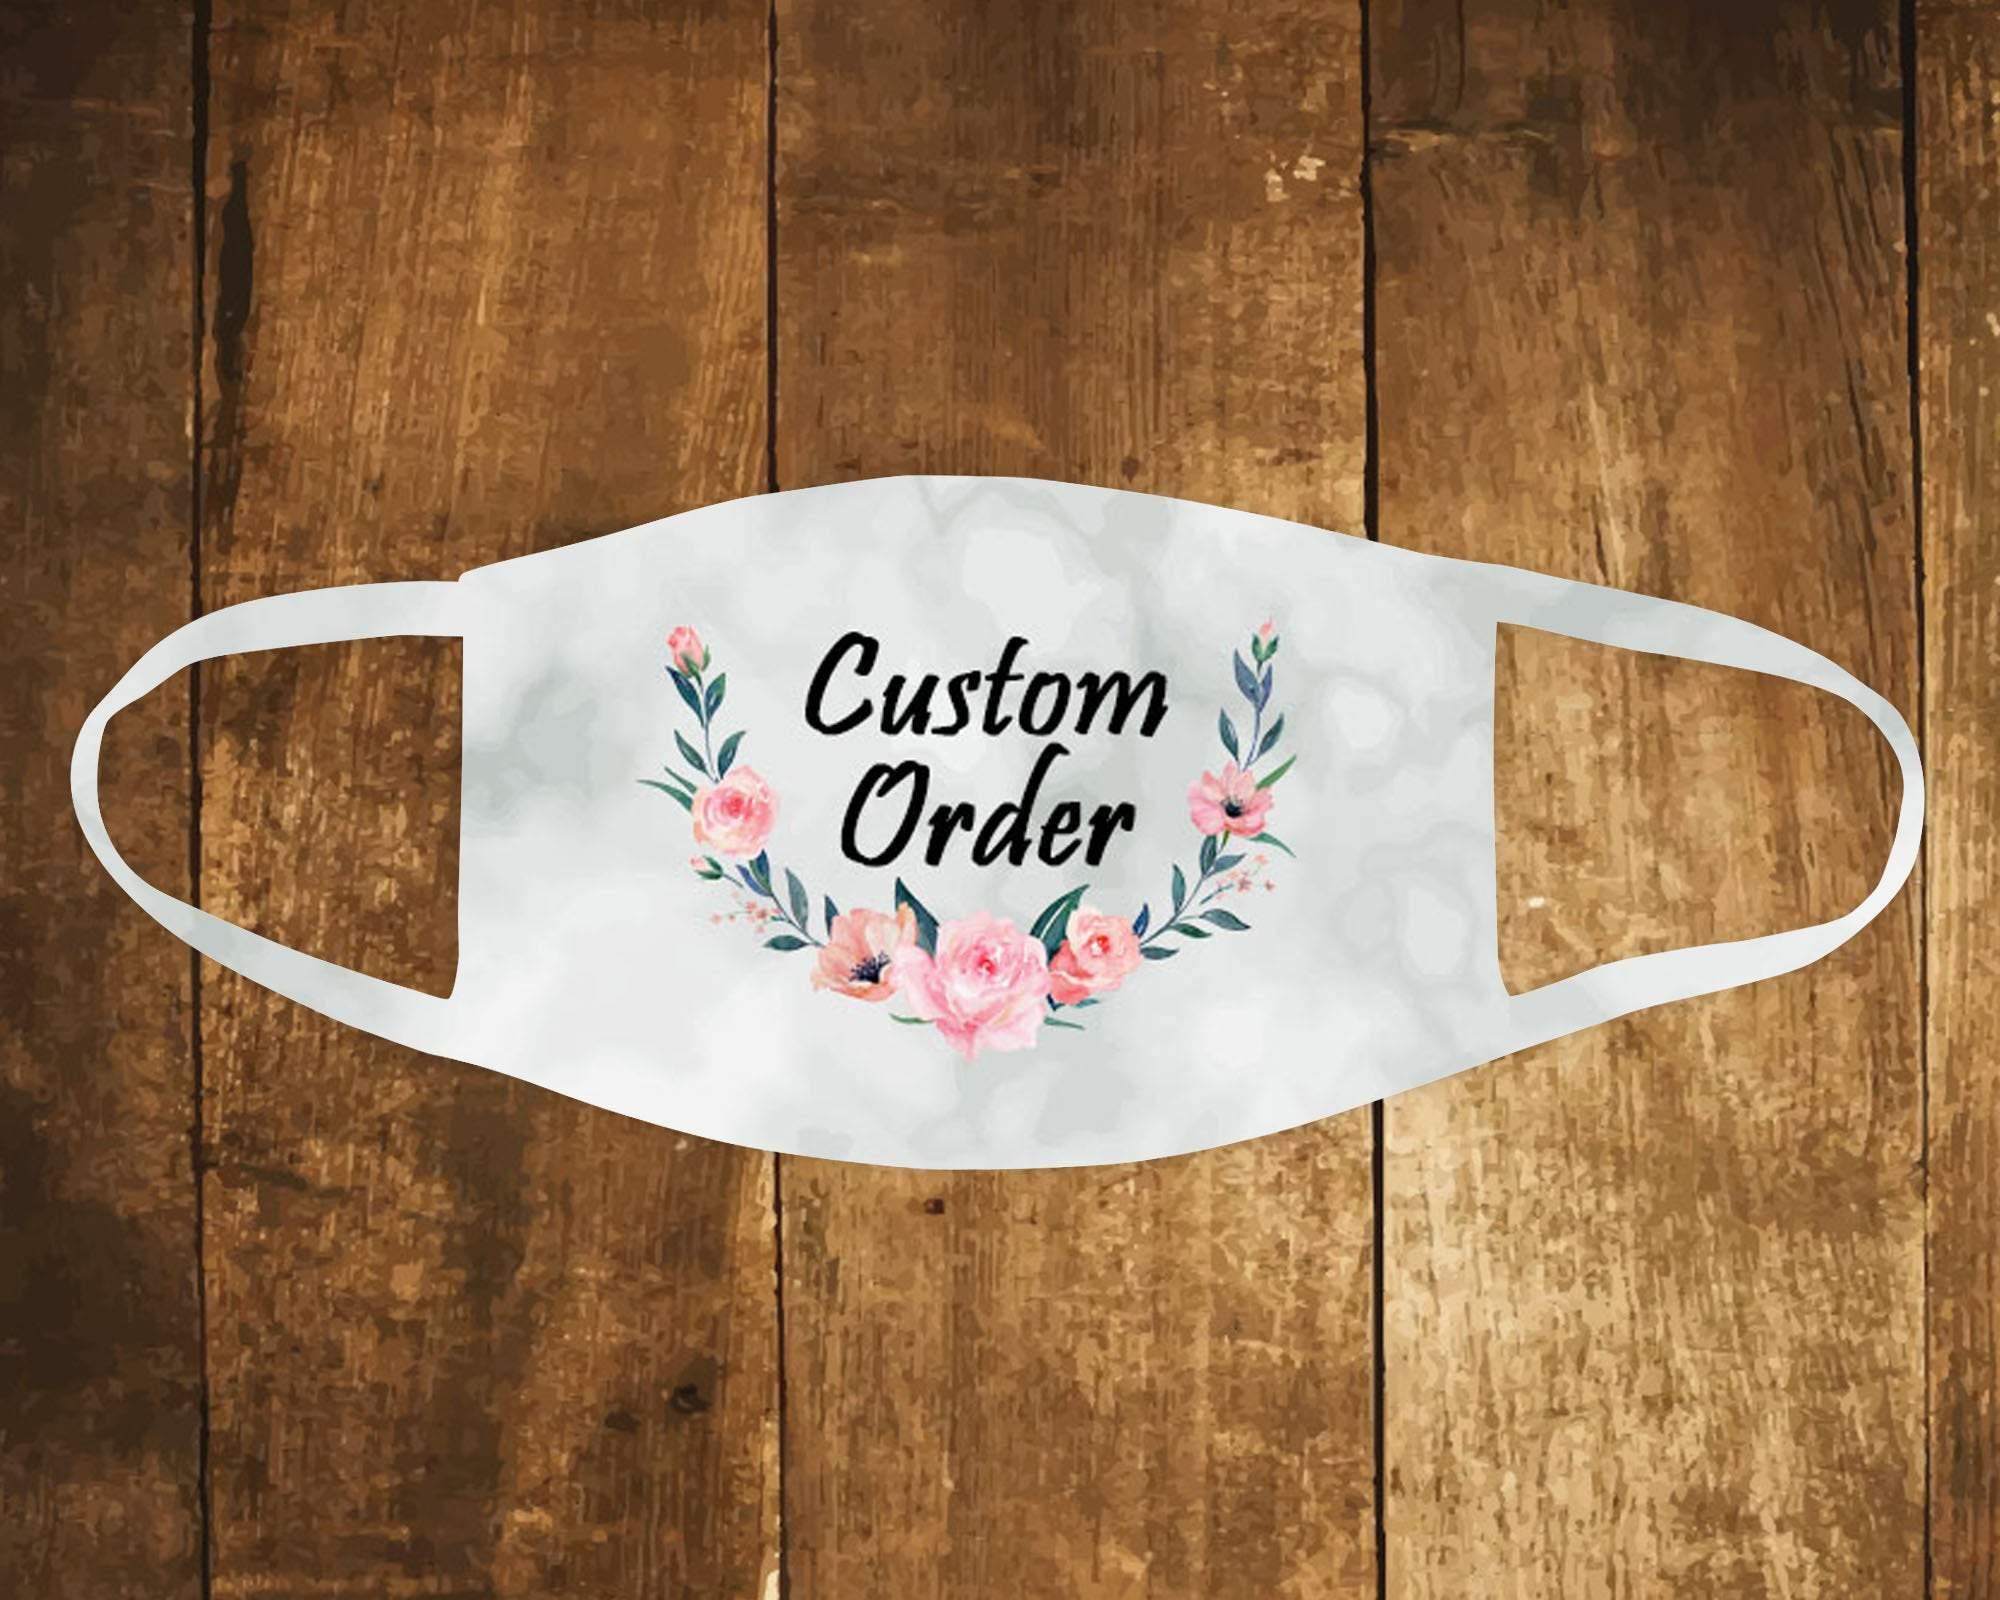 Personalized Face Mask | Custom Face Coverings | Custom Order - This & That Solutions - Personalized Face Mask | Custom Face Coverings | Custom Order - Personalized Gifts & Custom Home Decor